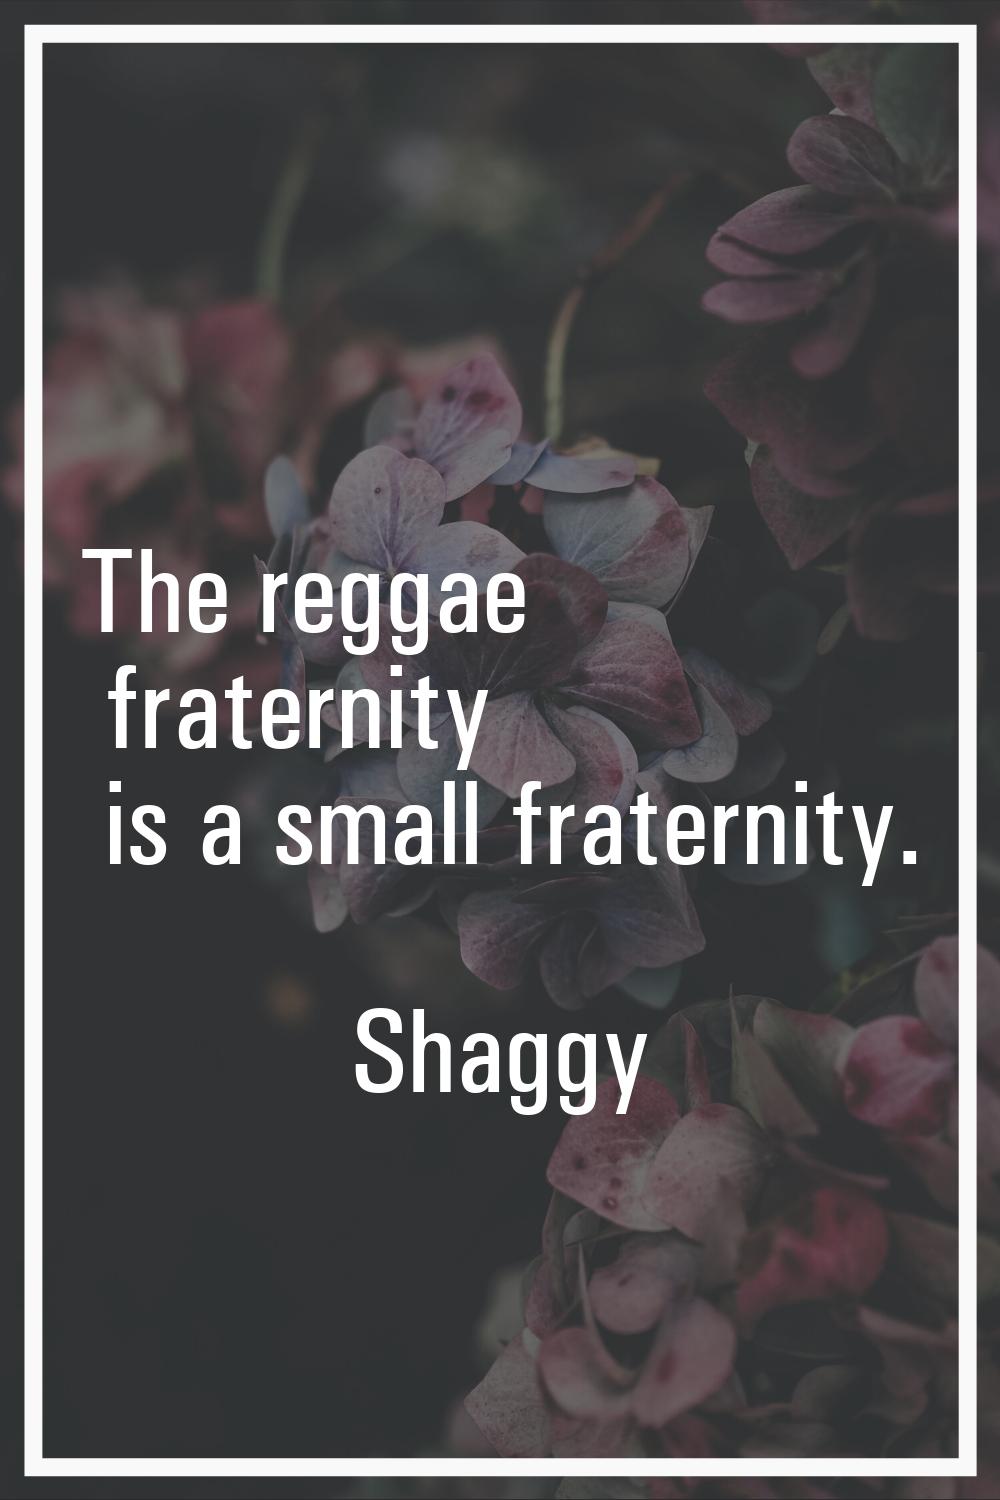 The reggae fraternity is a small fraternity.